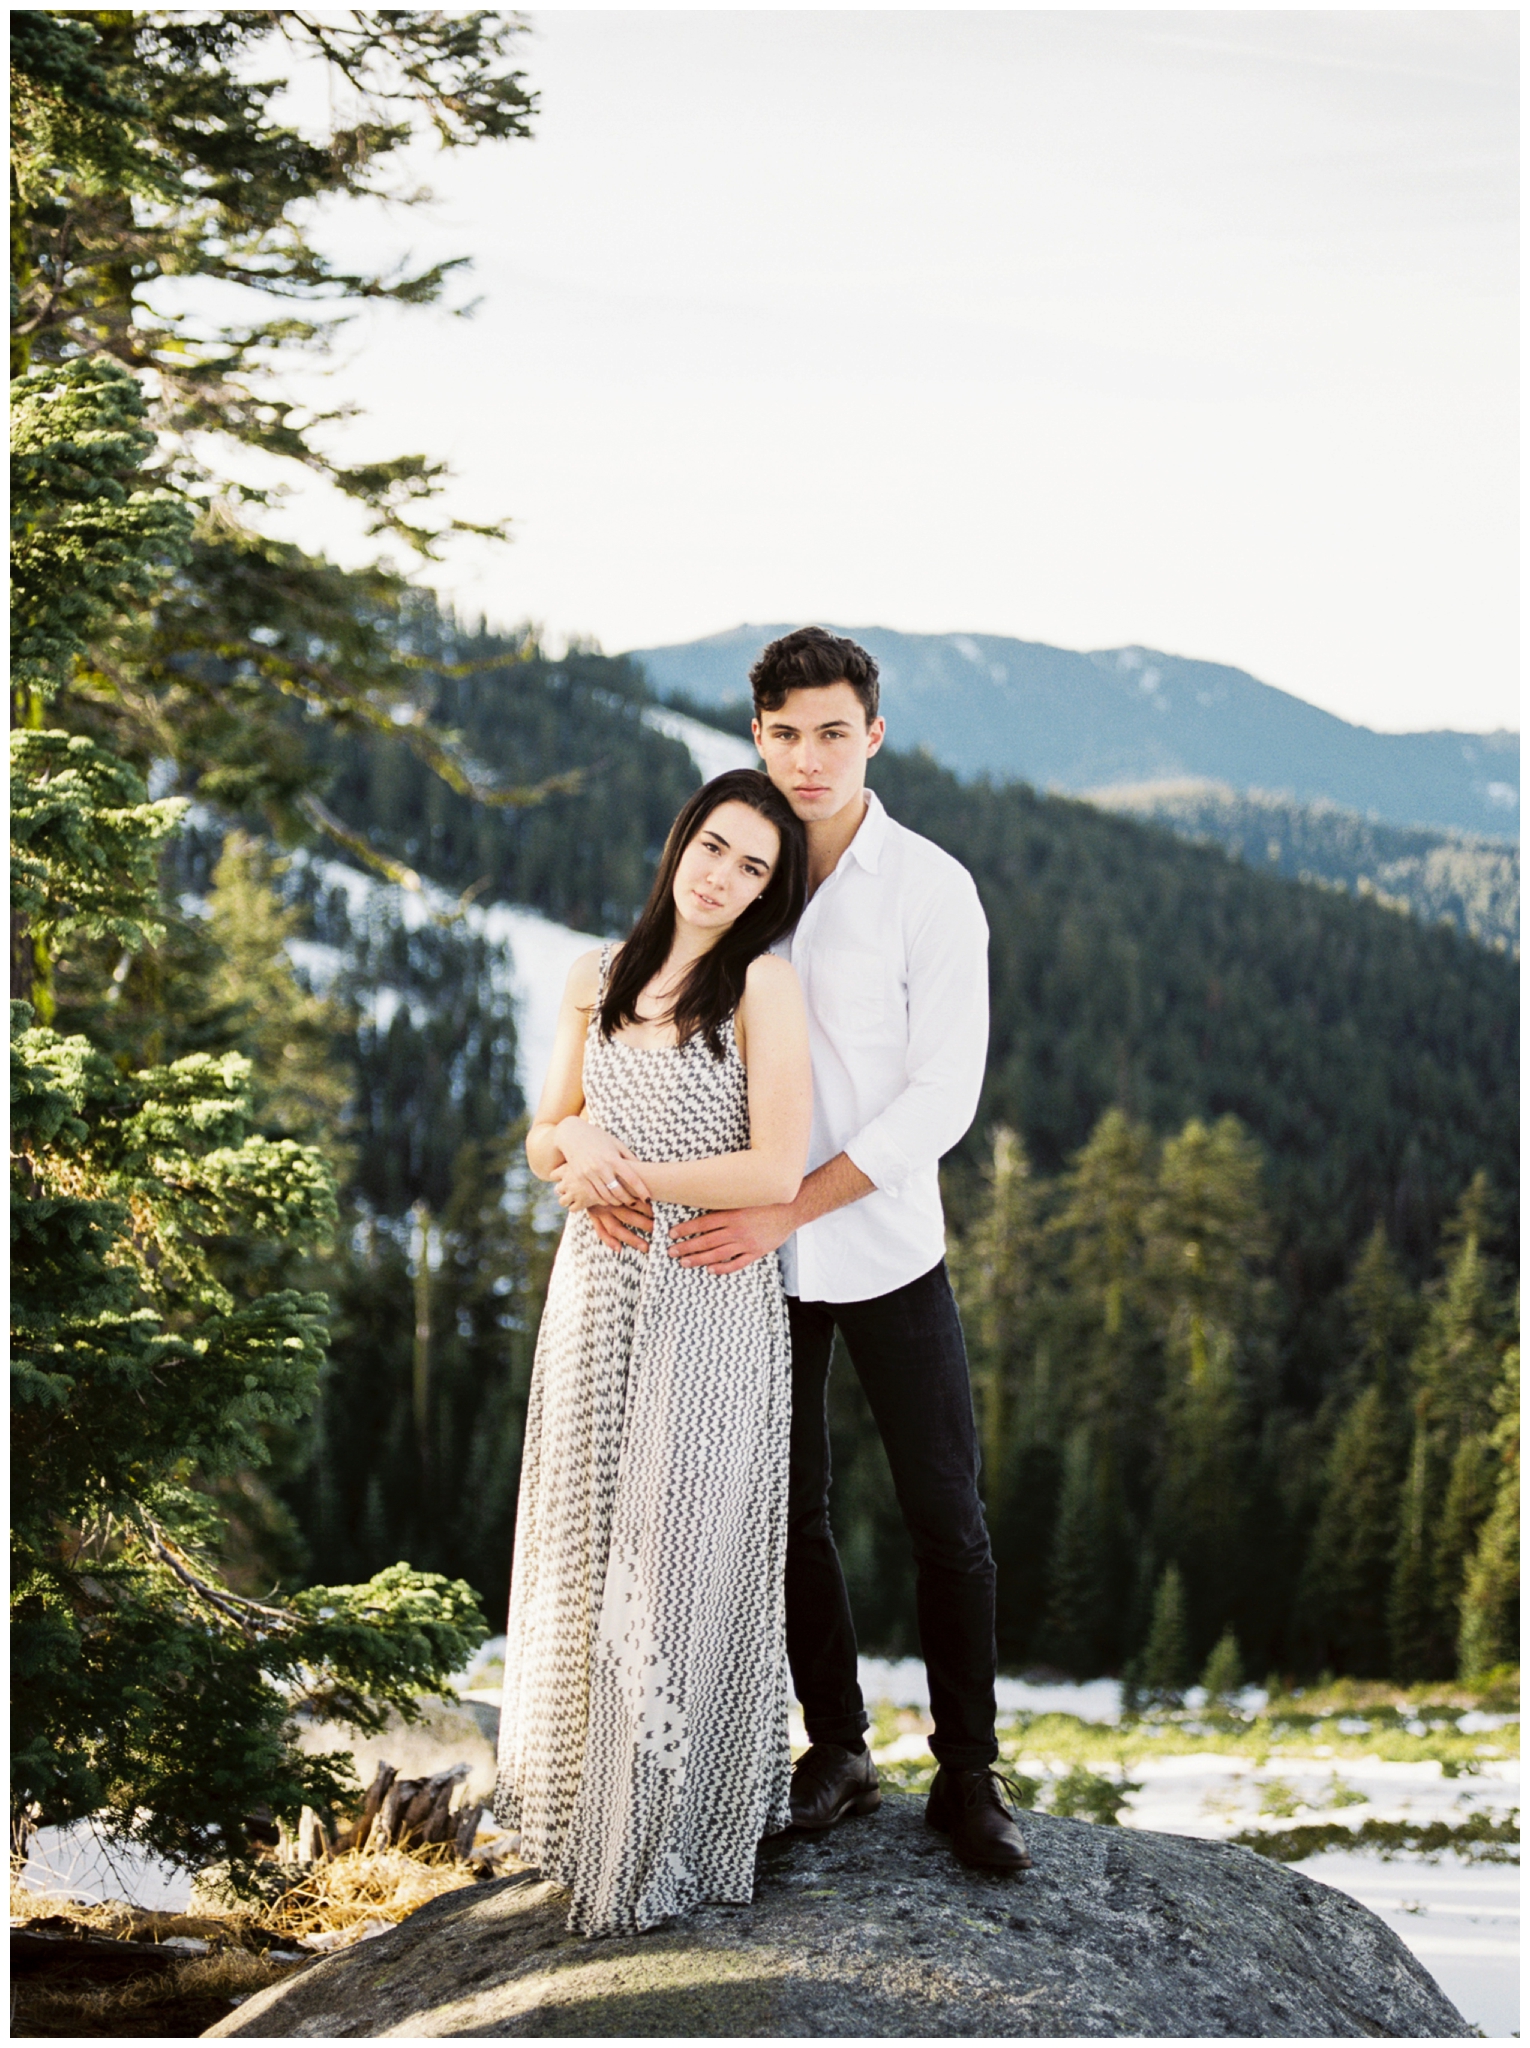 winter engagement session inspiration by juliet ashley photography